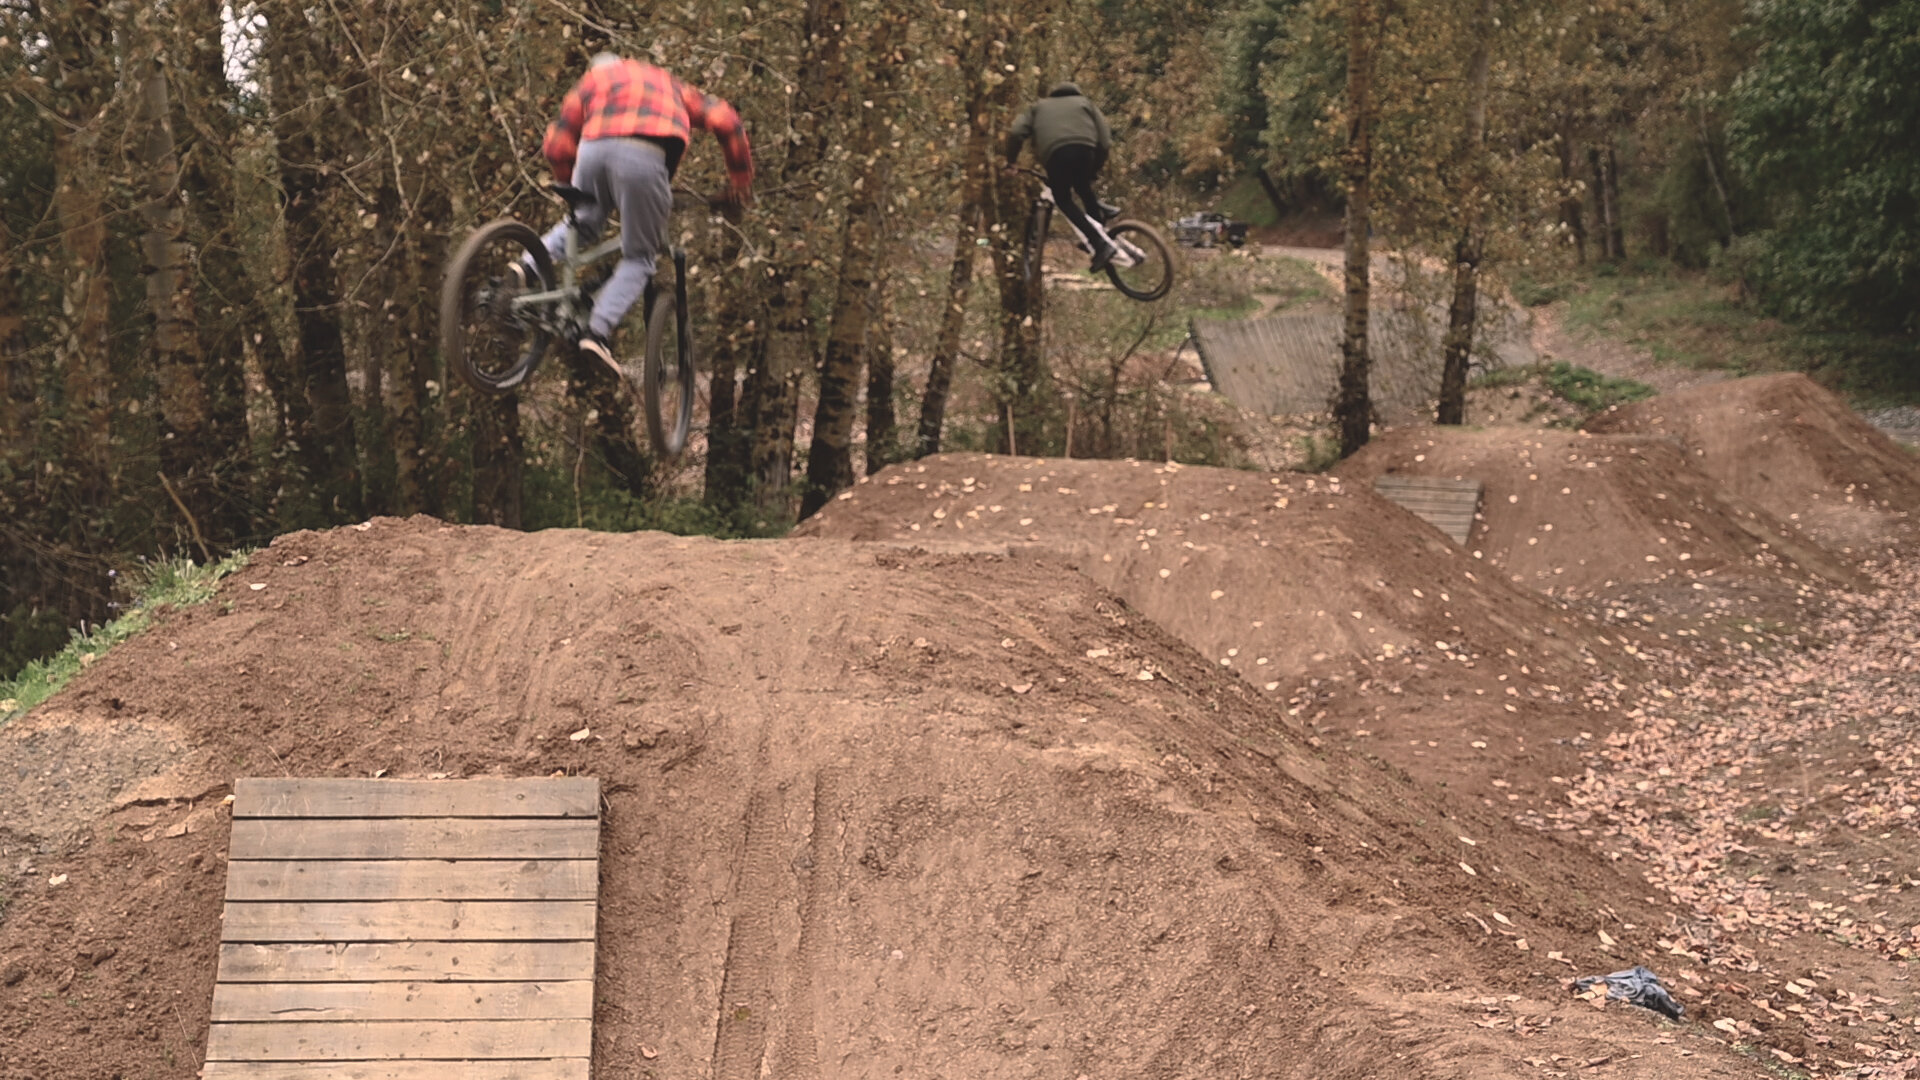 Riders jump in synchronicity at the skills park 